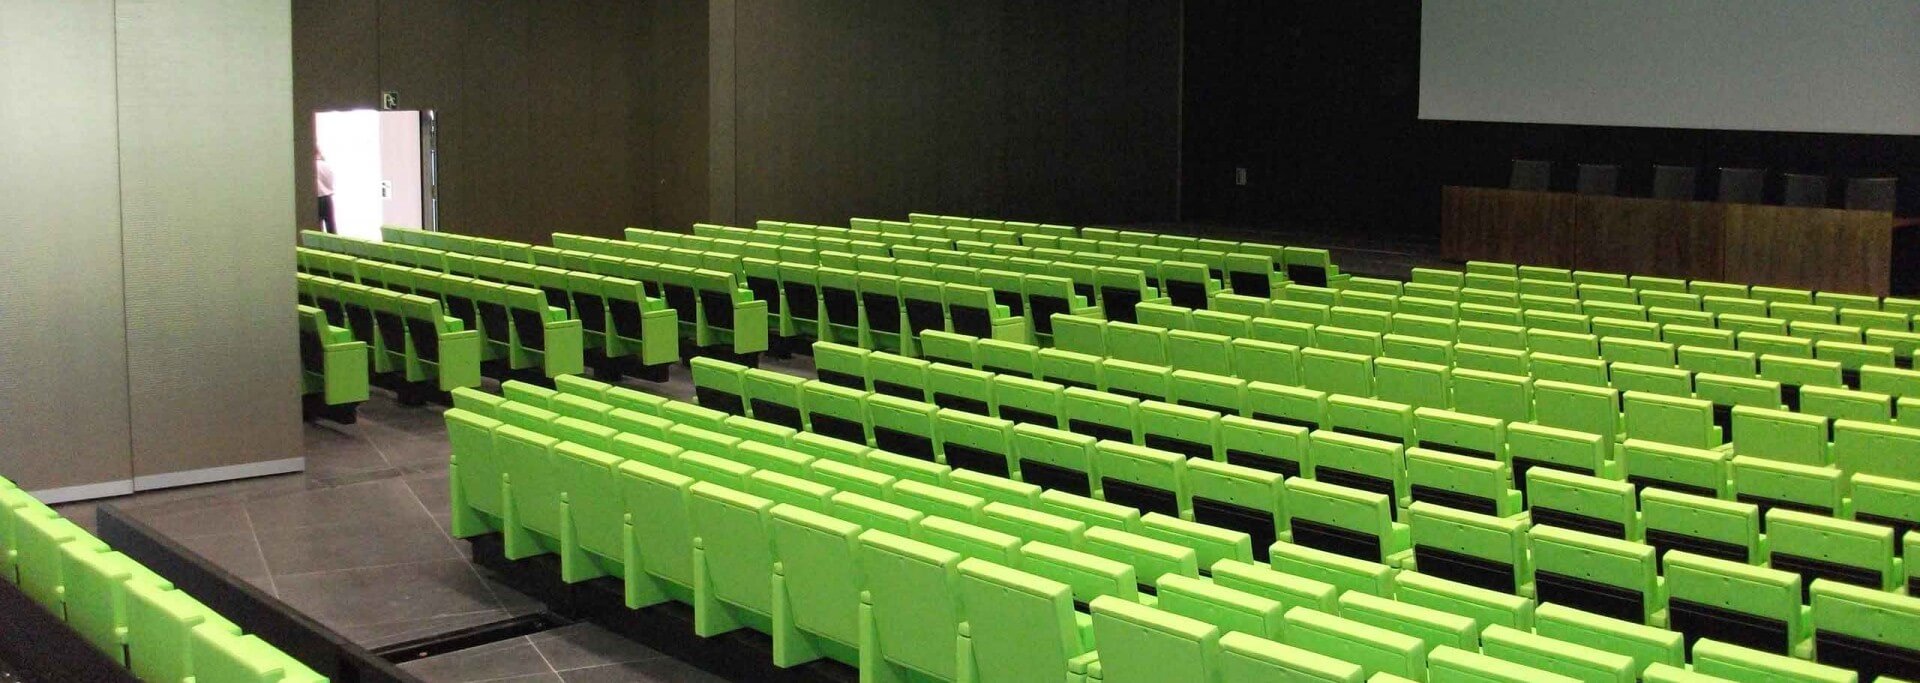 ODEON PROJECT – ODENSE MUSIC HOUSE (DENMARK) - GATEL220 curved motorized grandstand